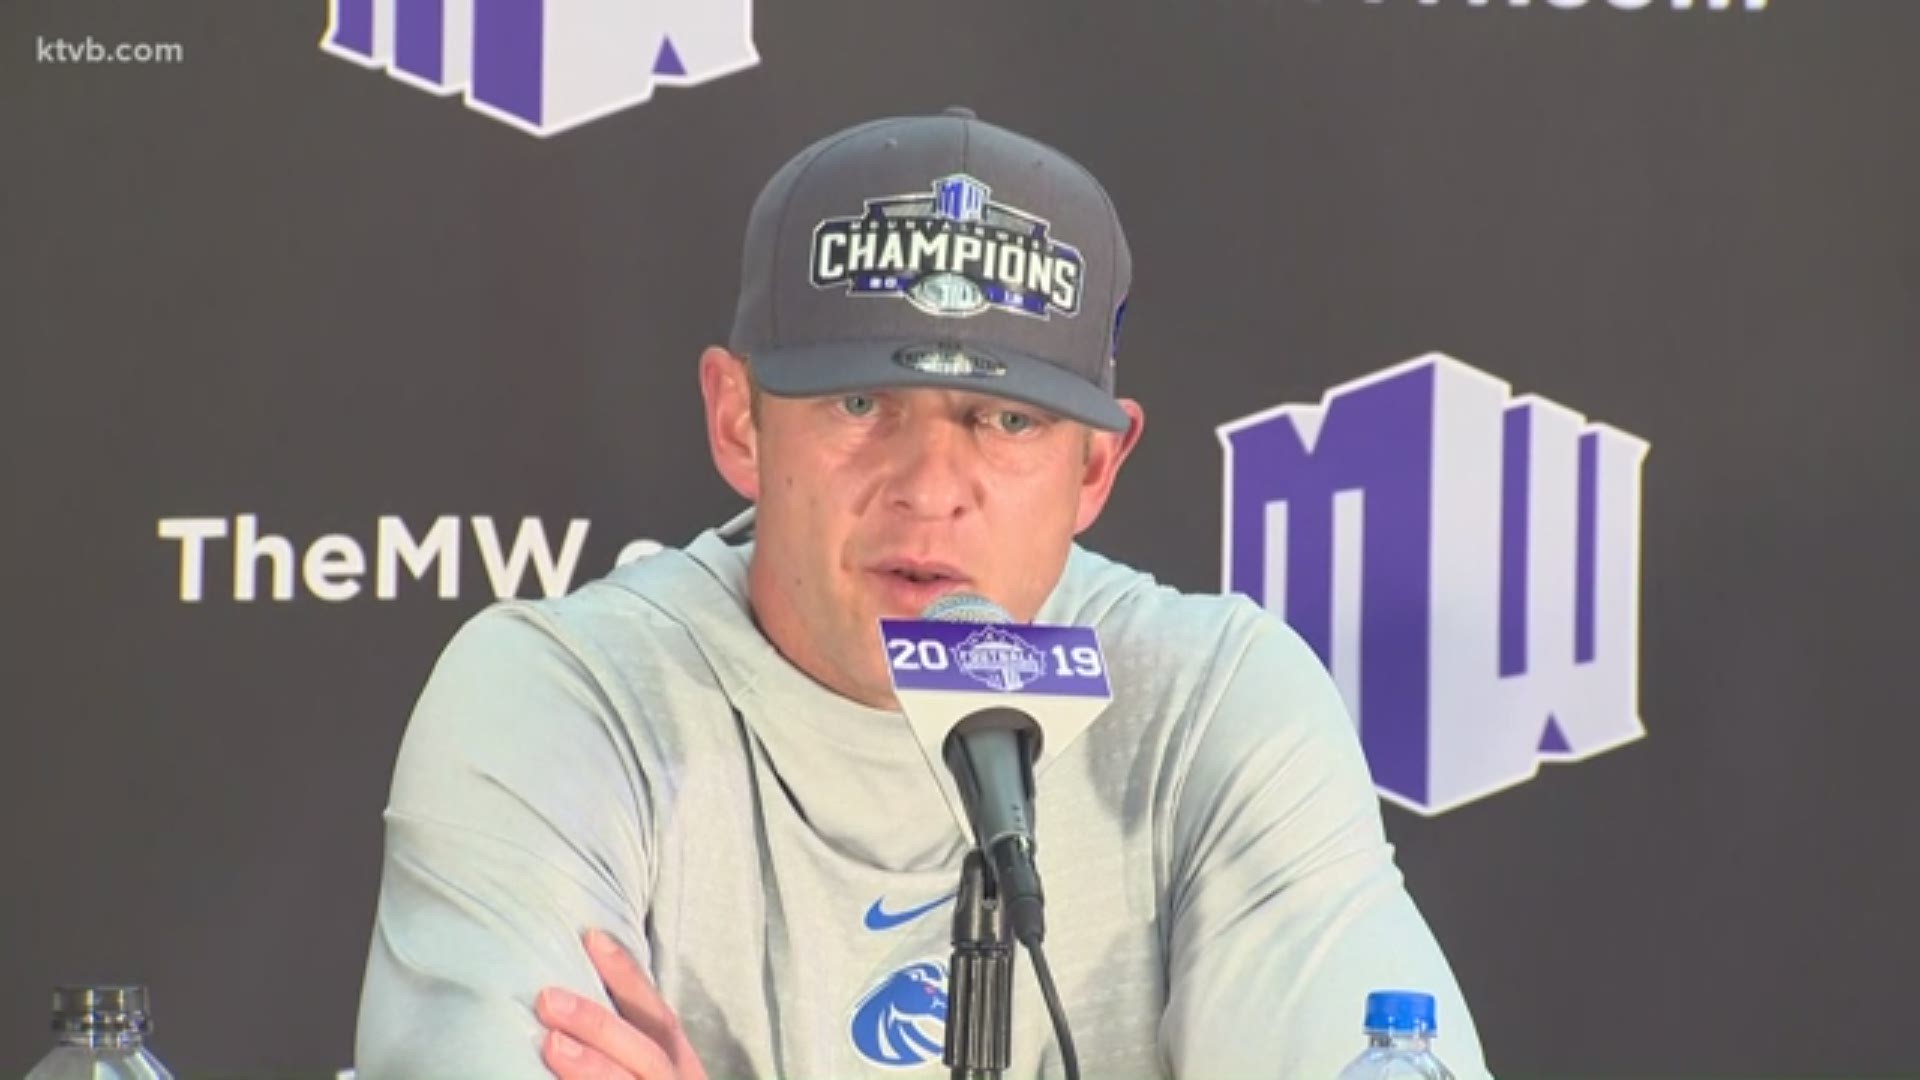 Coach Harsin talks about the team's brotherhood mentality going into the season and how key players stepped up and came to play in the title game.